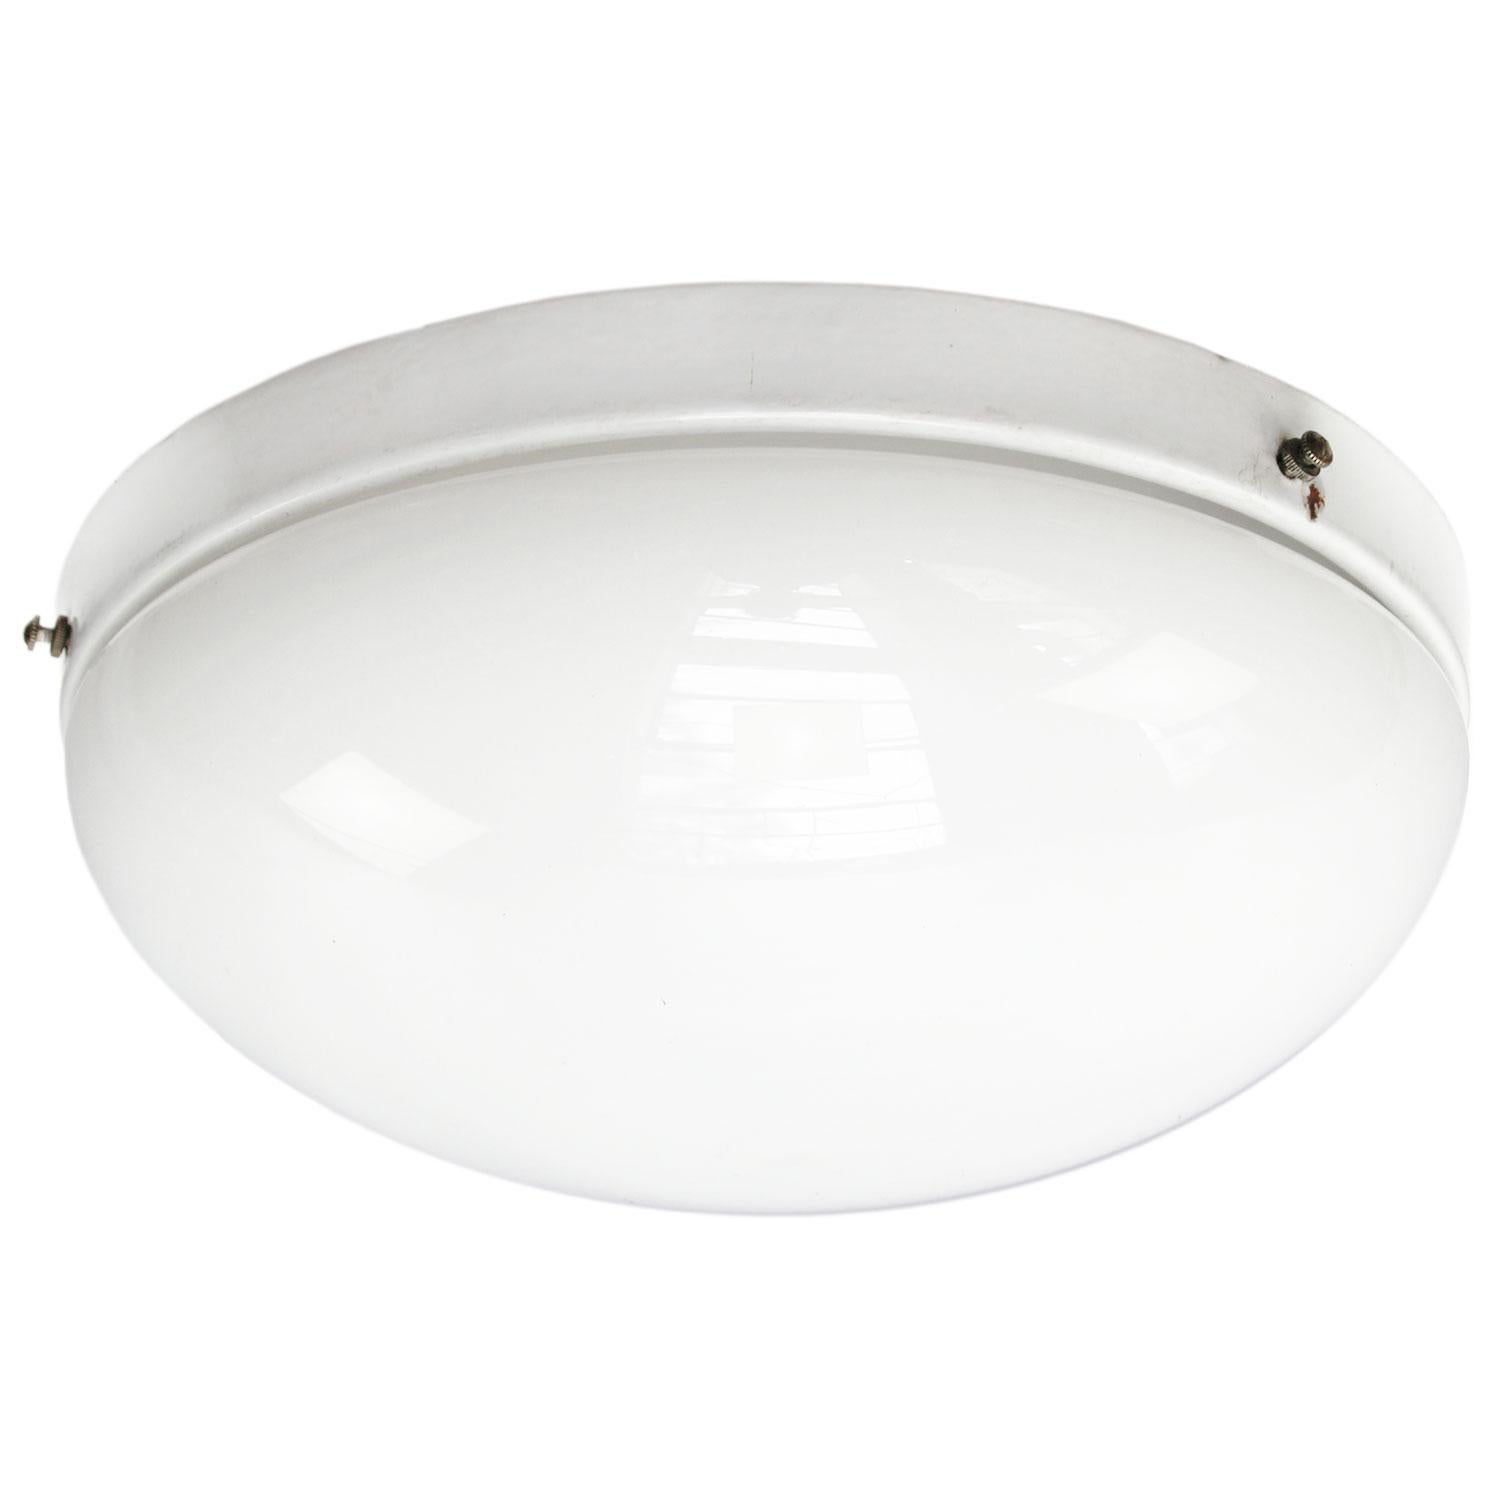 Industrial ceiling lamp, wall light, flush mount.
Enamel base with white opaline glass.

Weight: 1.50 kg / 3.3 lb

Priced per individual item. All lamps have been made suitable by international standards for incandescent light bulbs,